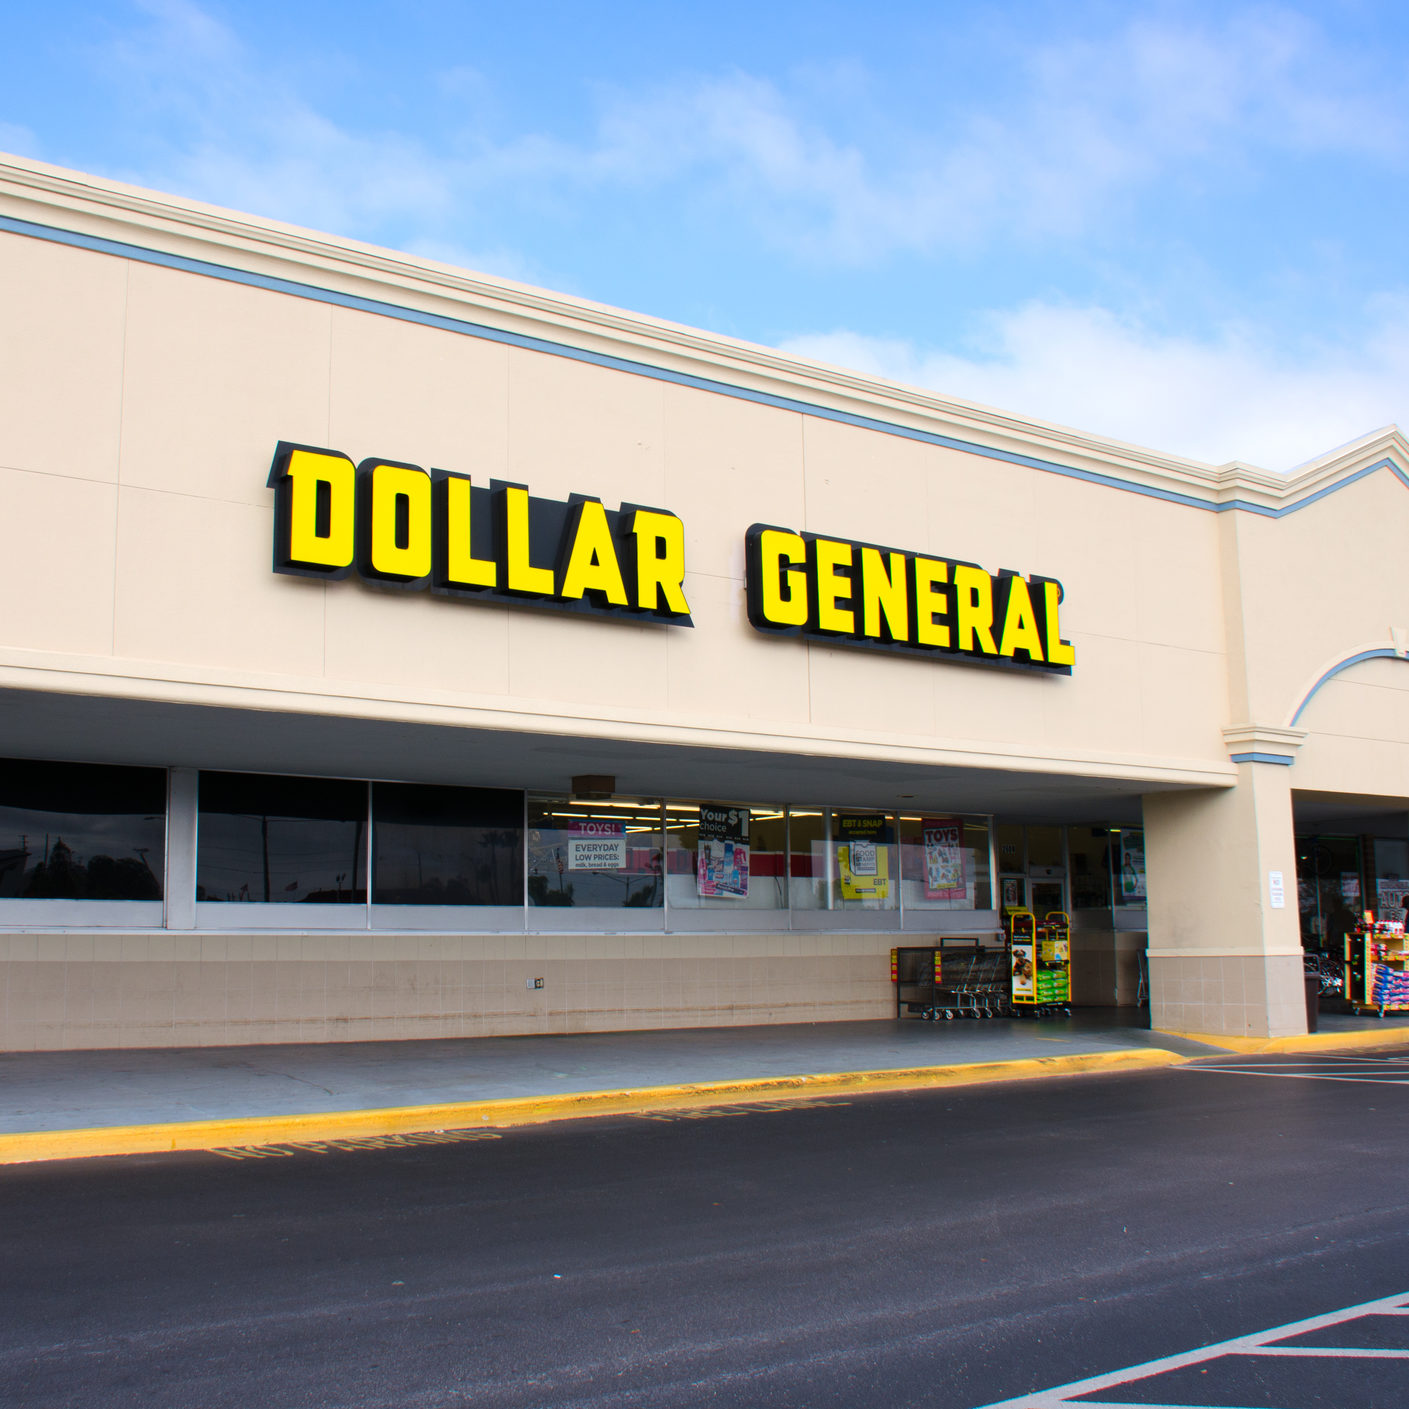 Dollar General: Save an extra 50% on clearance items plus added coupon savings